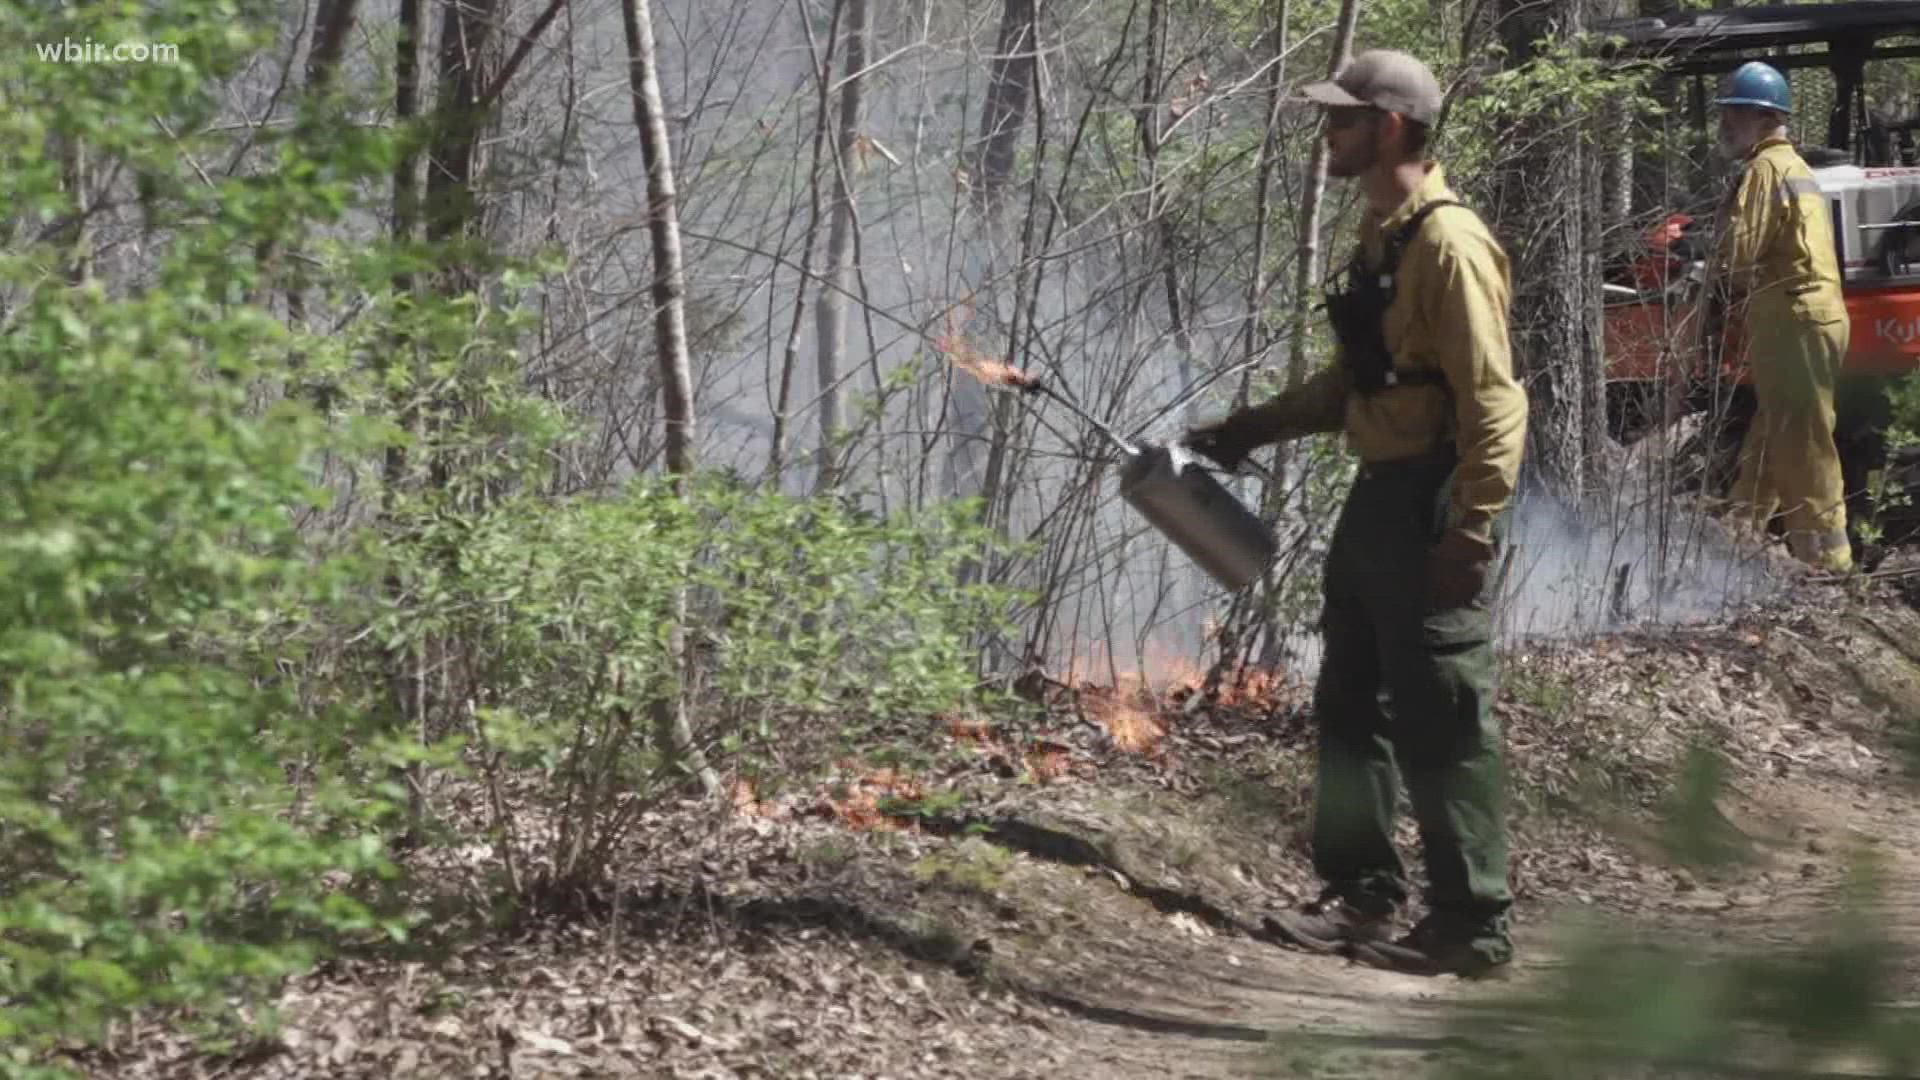 The 2-acre burn is part of the school's ongoing conservation effort to restore the woods.